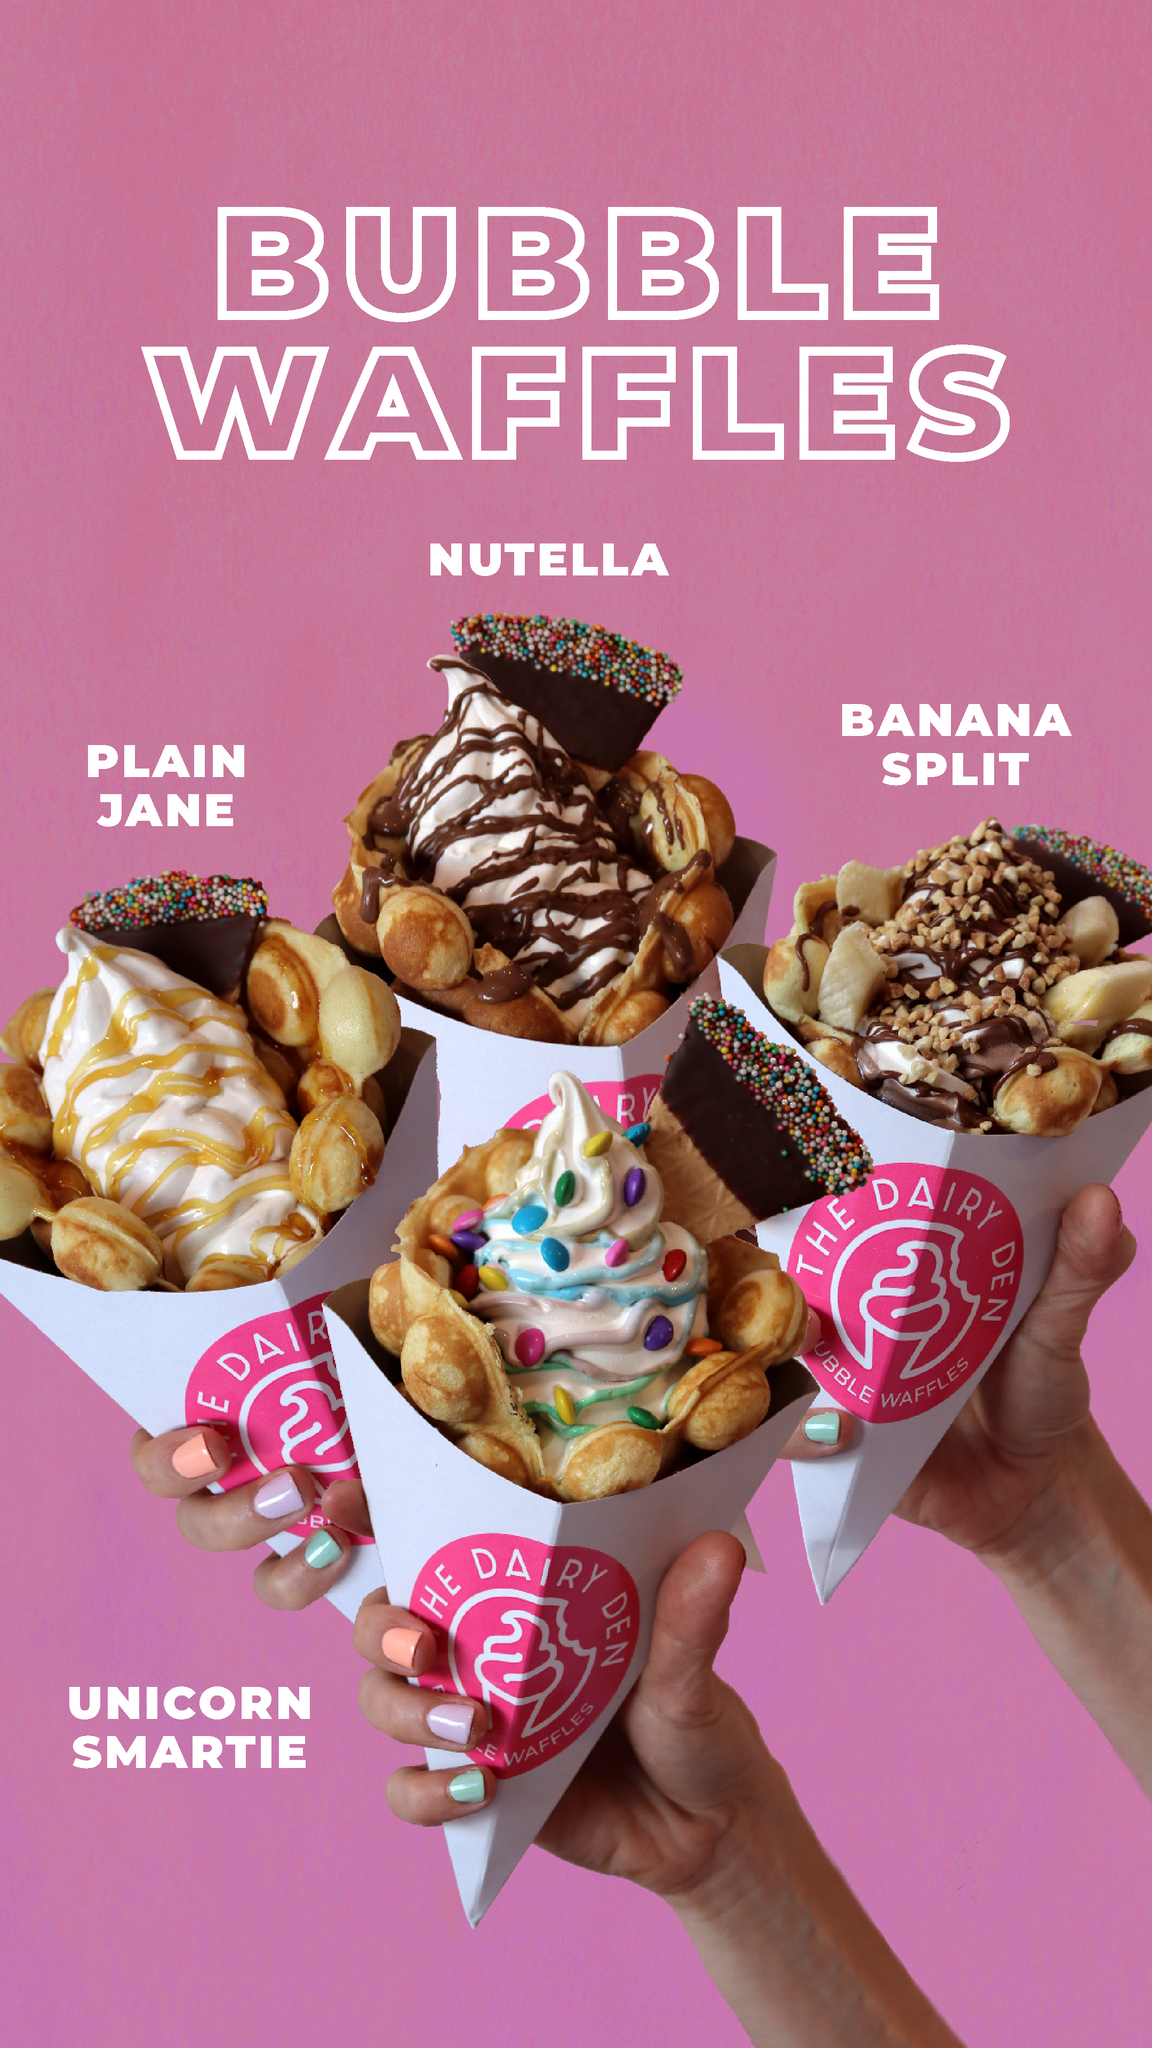 Indulge in Delight: Introducing Our New Bubble Waffle Creations at The Dairy Den!